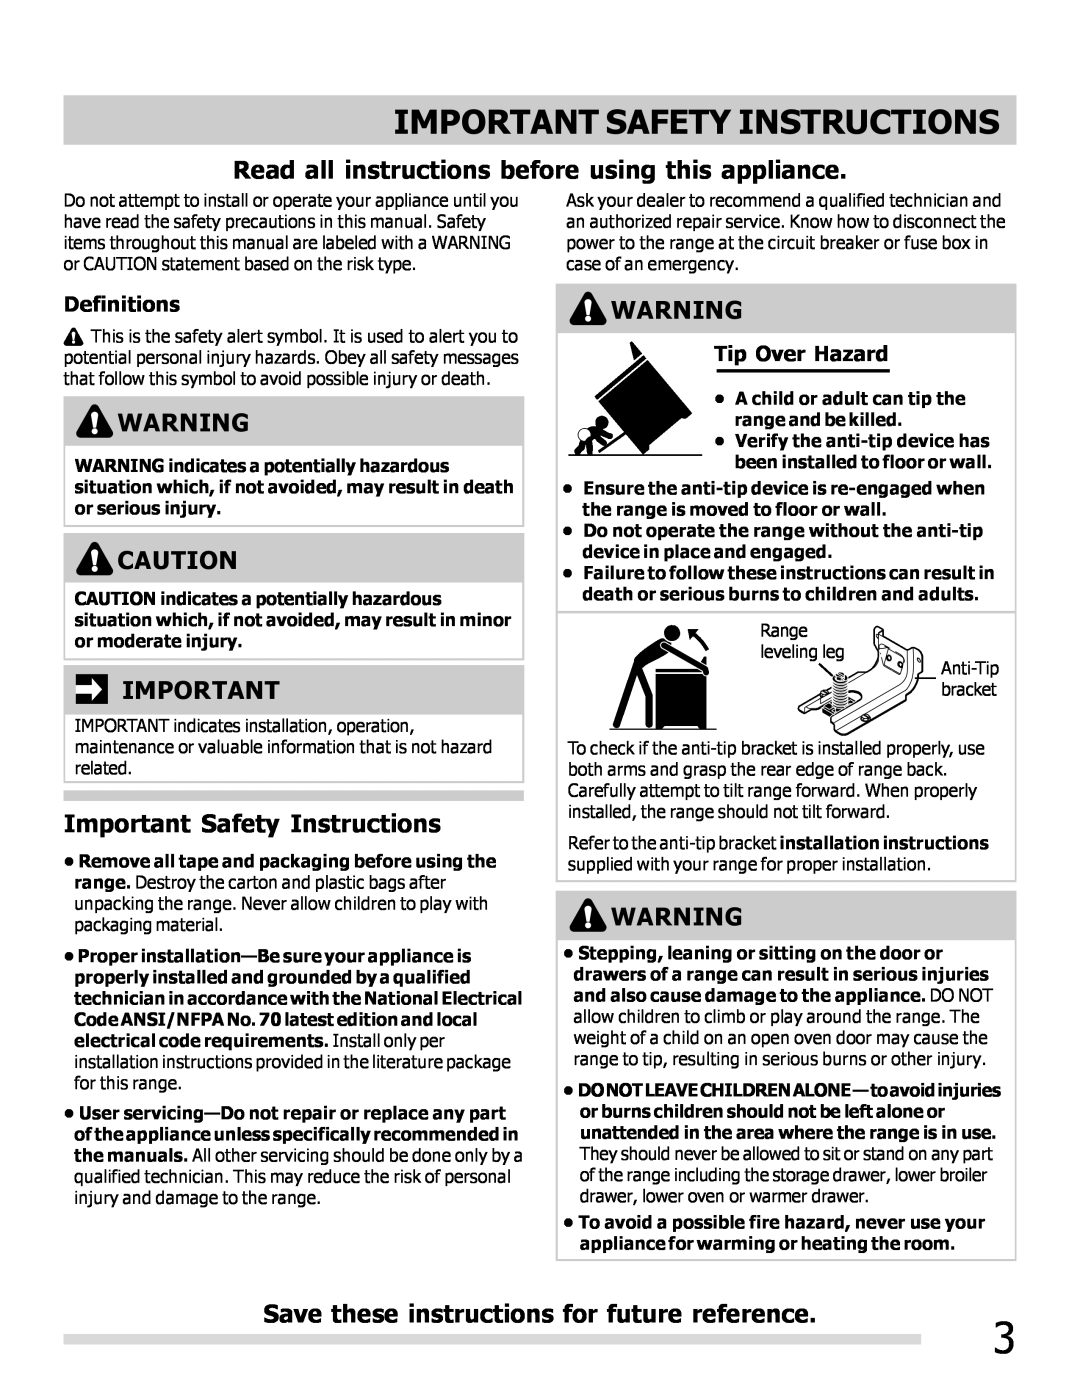 Frigidaire FPEF3081MF Important Safety Instructions, Read all instructions before using this appliance, Definitions 